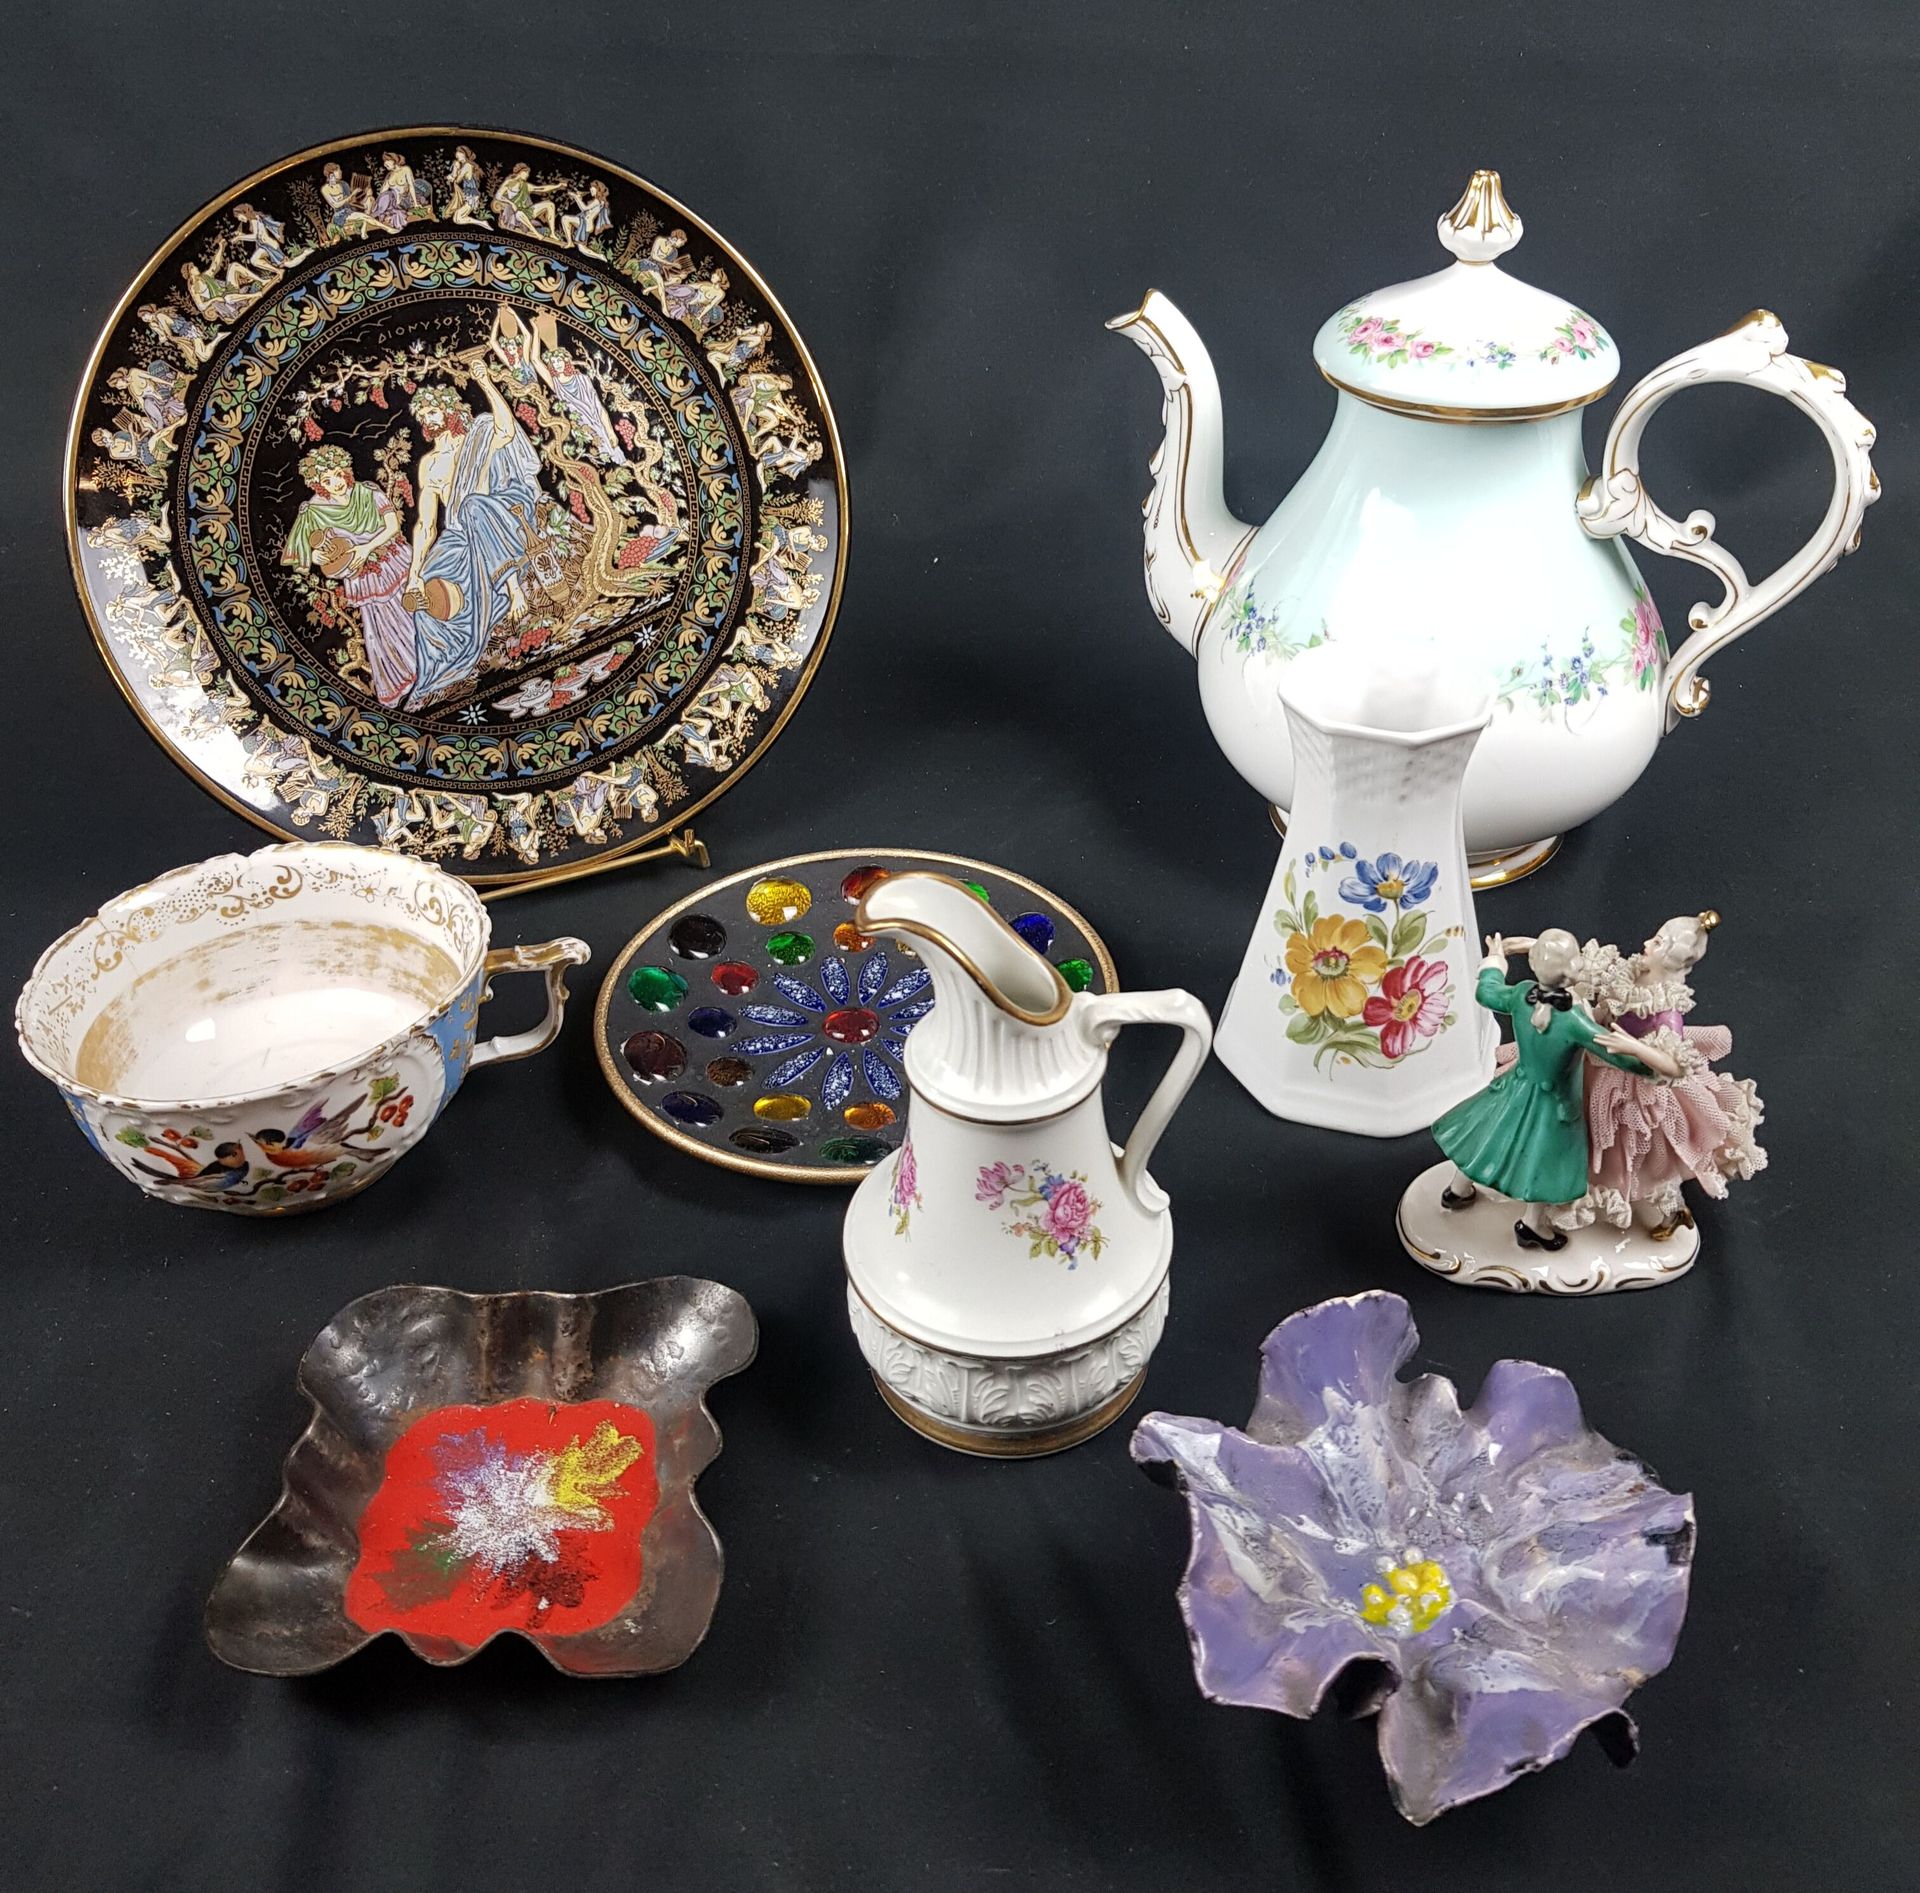 Null LOT of porcelain and earthenware - wear and tear